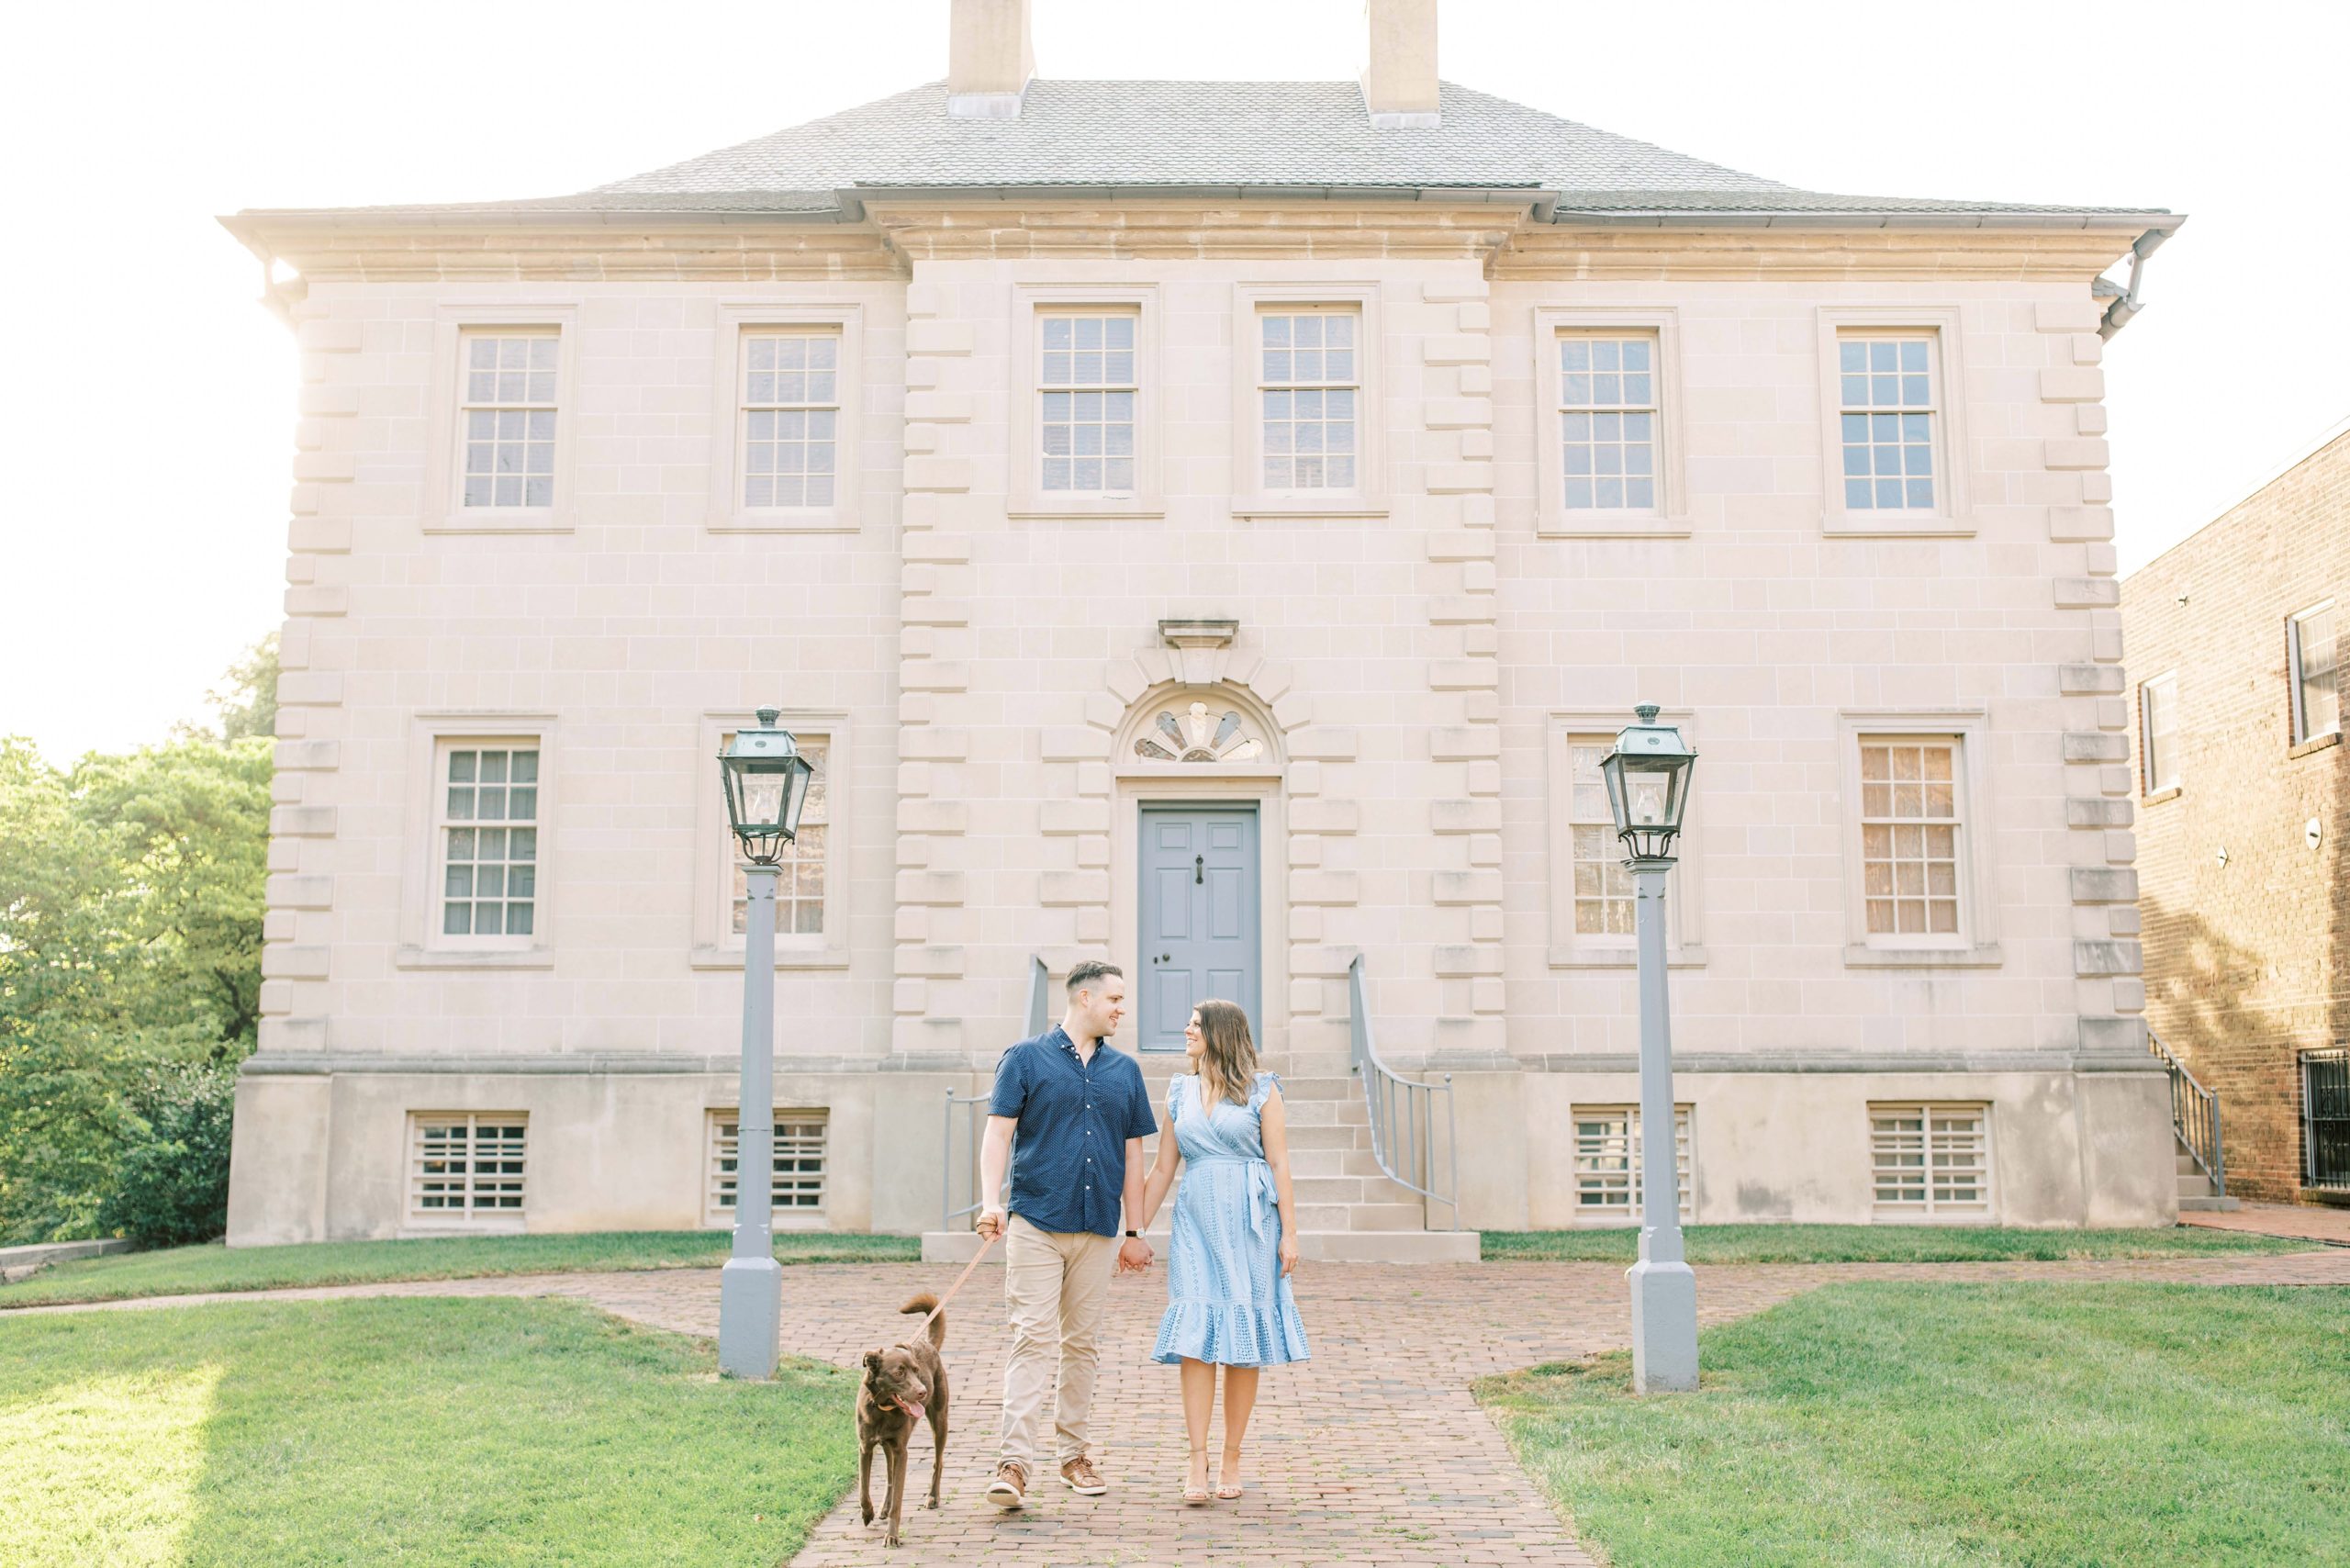 This Washington, DC wedding photographer reviews the highlights of her family & anniversary portrait sessions from the 2020 season.